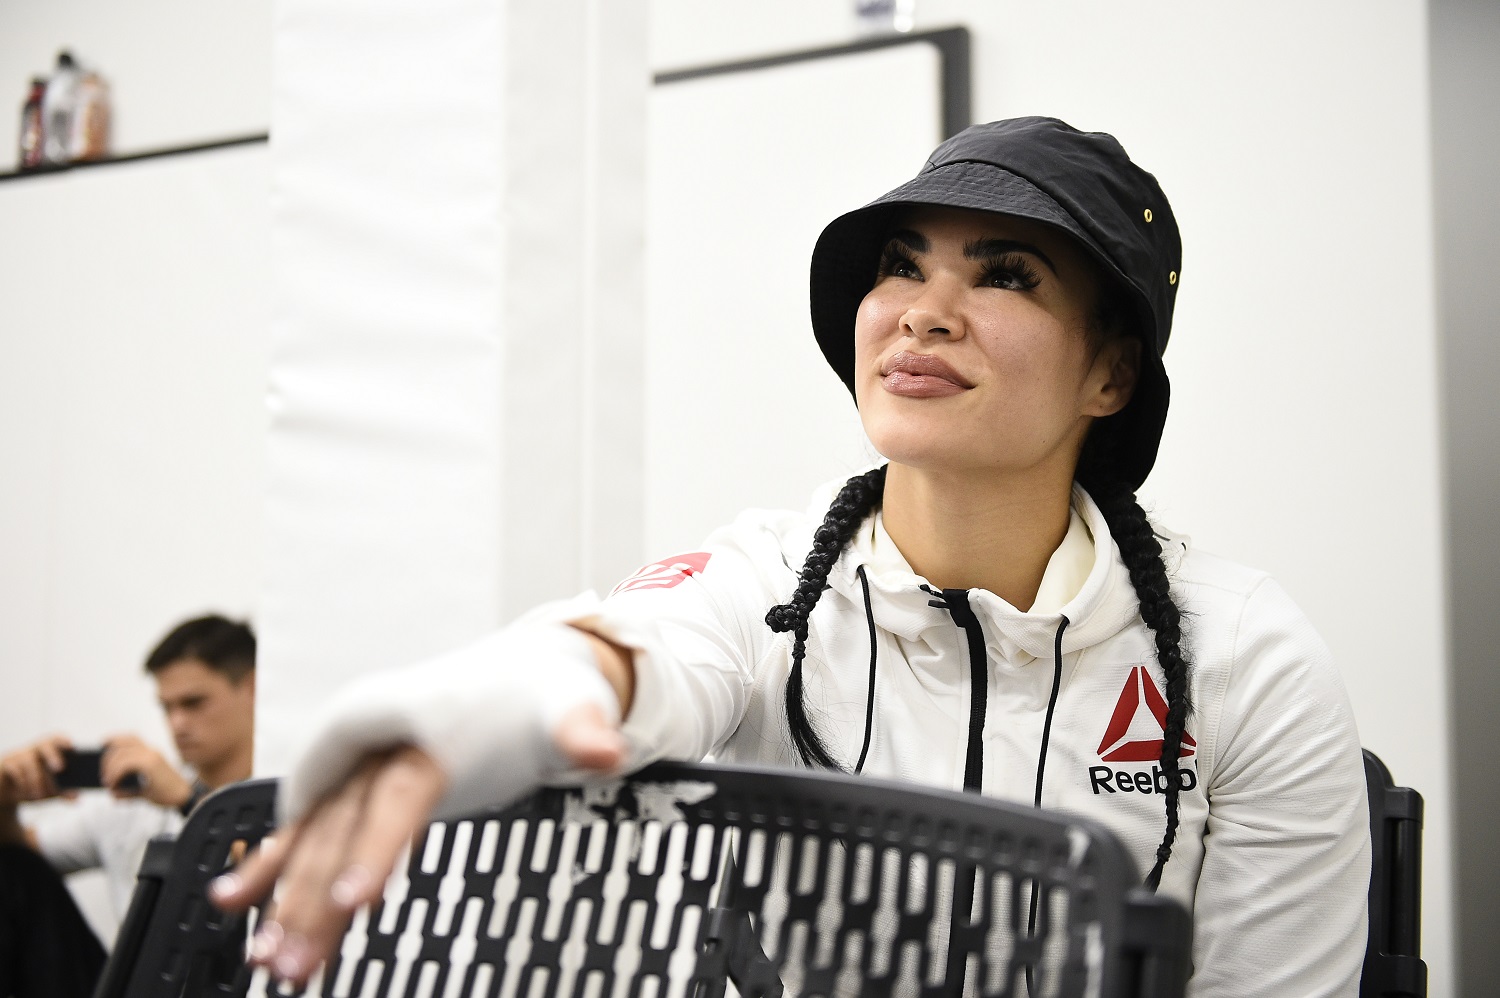 Rachael Ostovich gets her hands wrapped backstage during the UFC Fight Night at UFC APEX on Nov. 28, 2020, in Las Vegas. The bout was her last before being released by the UFC. | Chris Unger/Zuffa LLC